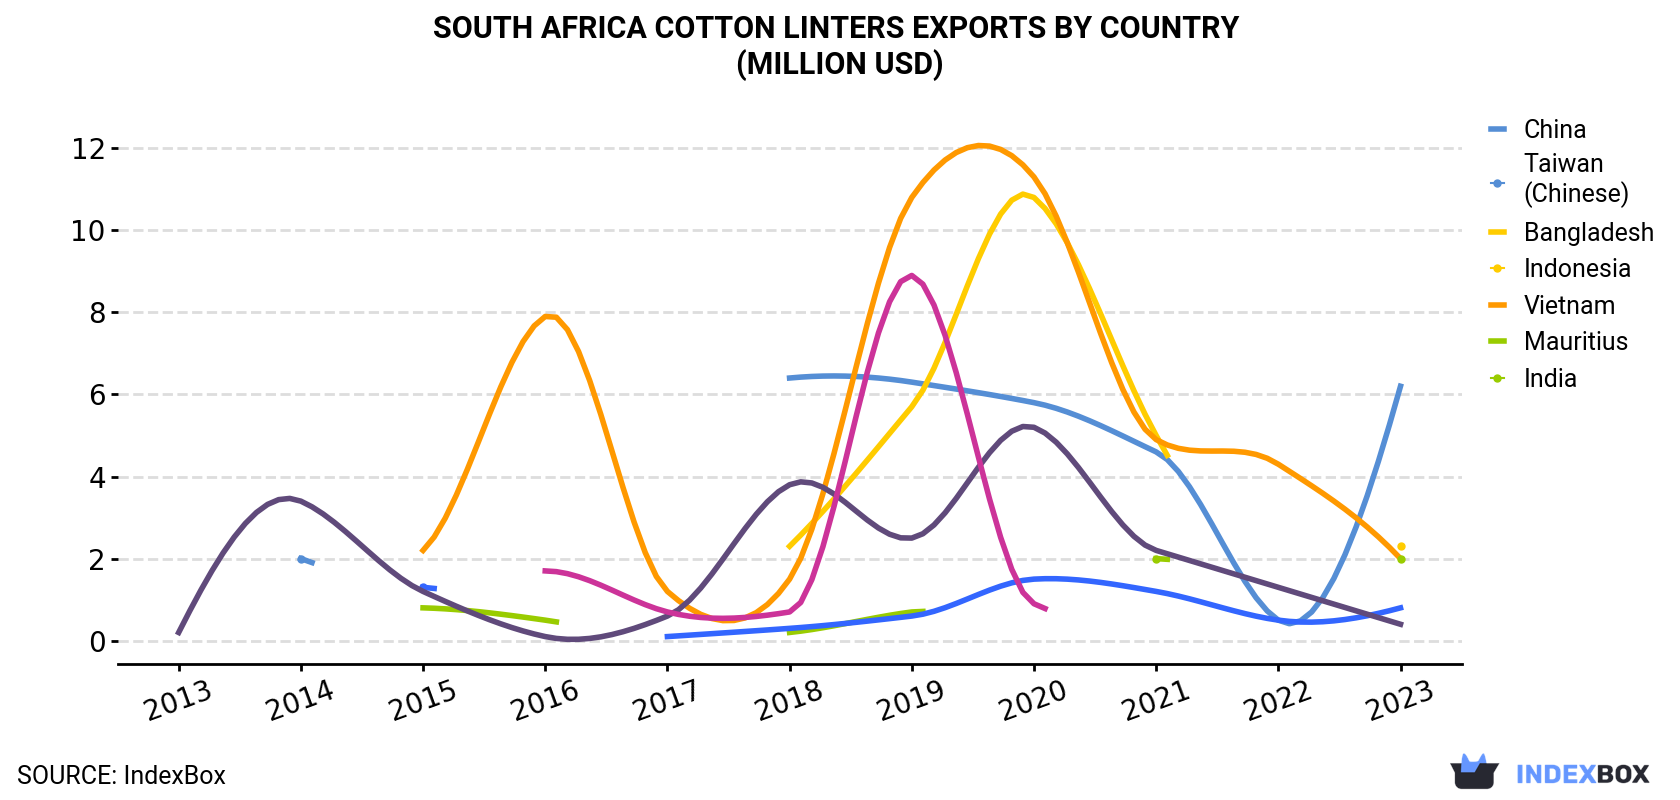 South Africa Cotton Linters Exports By Country (Million USD)